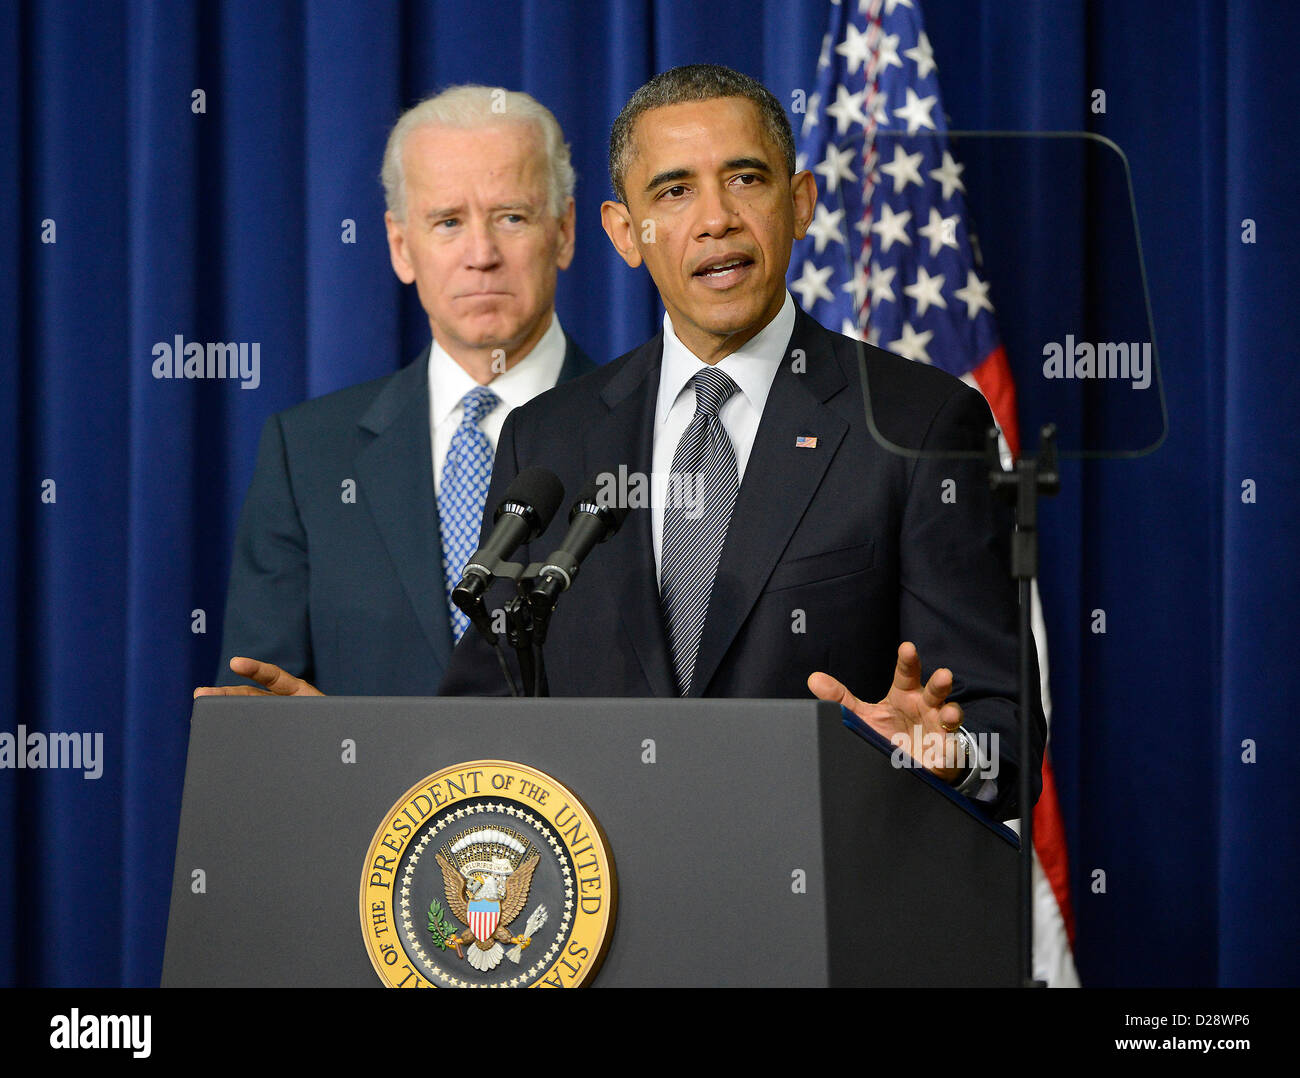 United States President Barack Obama makes remarks as Vice President Joe Biden listens at an event at the White House in Washington, D.C. to unveil a set of proposals to reduce gun violence on Wednesday, January 16, 2012..Credit: Ron Sachs / CNP Stock Photo